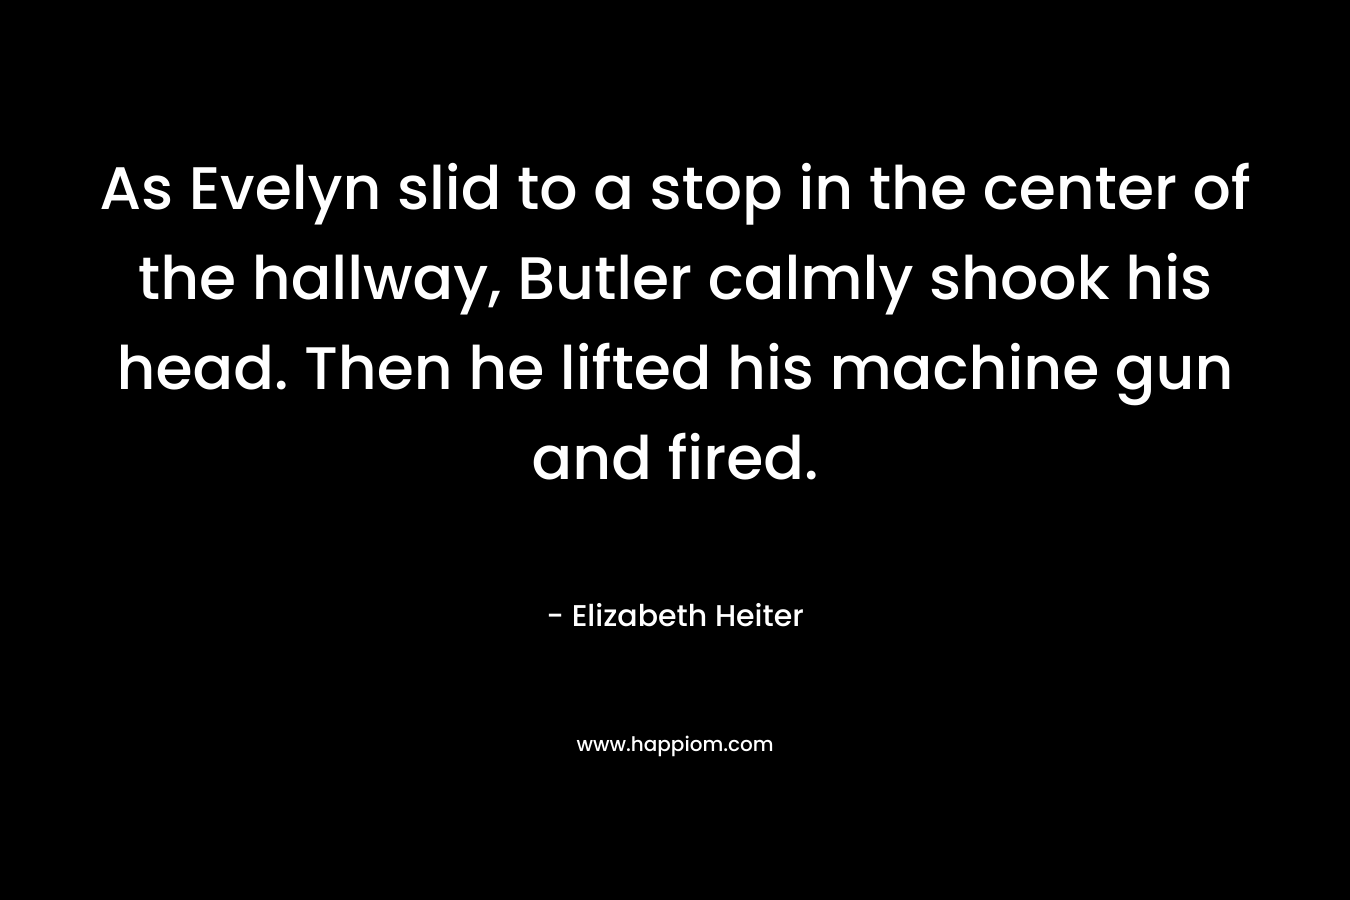 As Evelyn slid to a stop in the center of the hallway, Butler calmly shook his head. Then he lifted his machine gun and fired. – Elizabeth Heiter